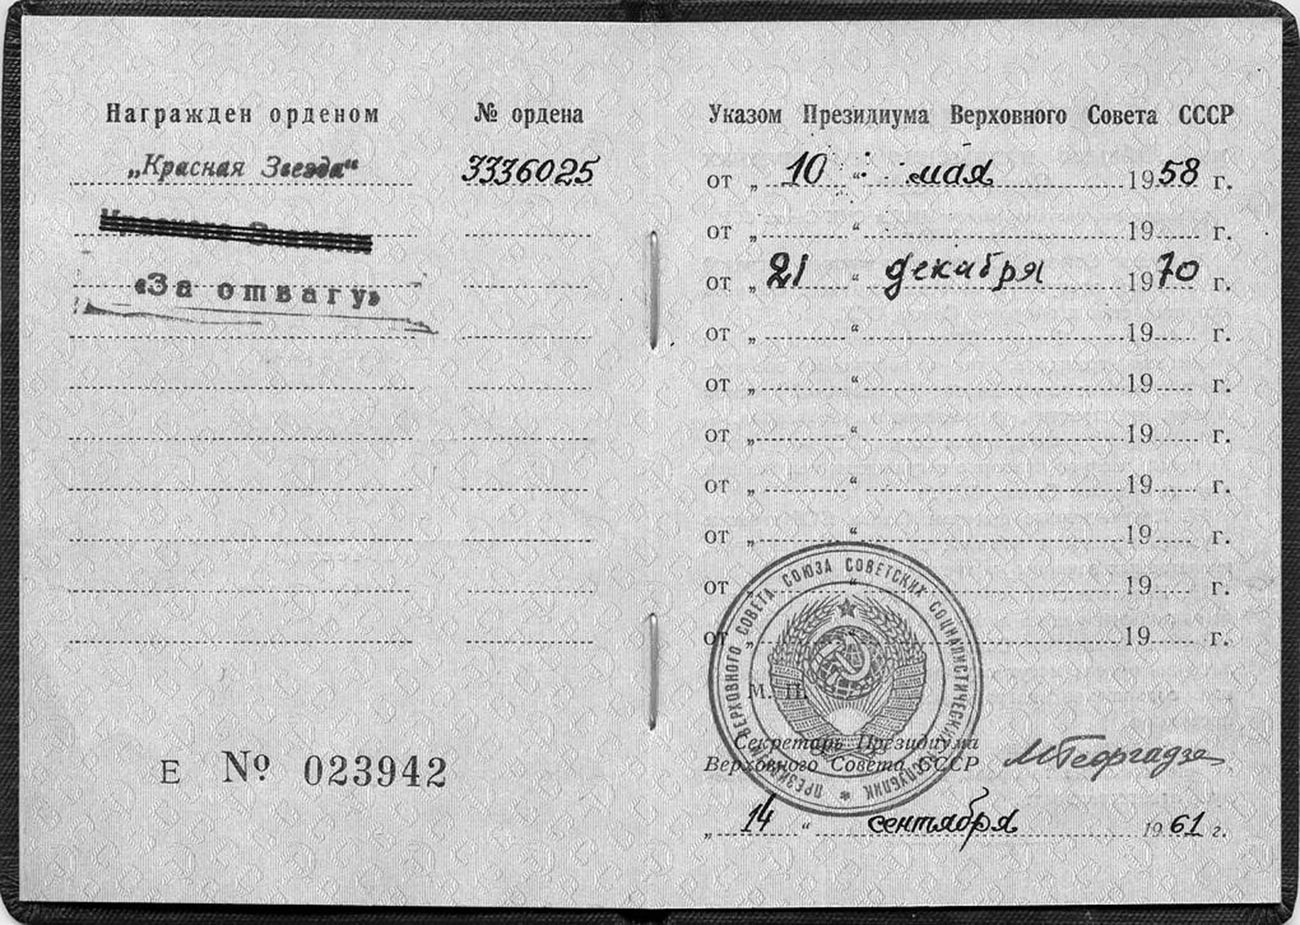 A record in Africa's Soviet Order Book.